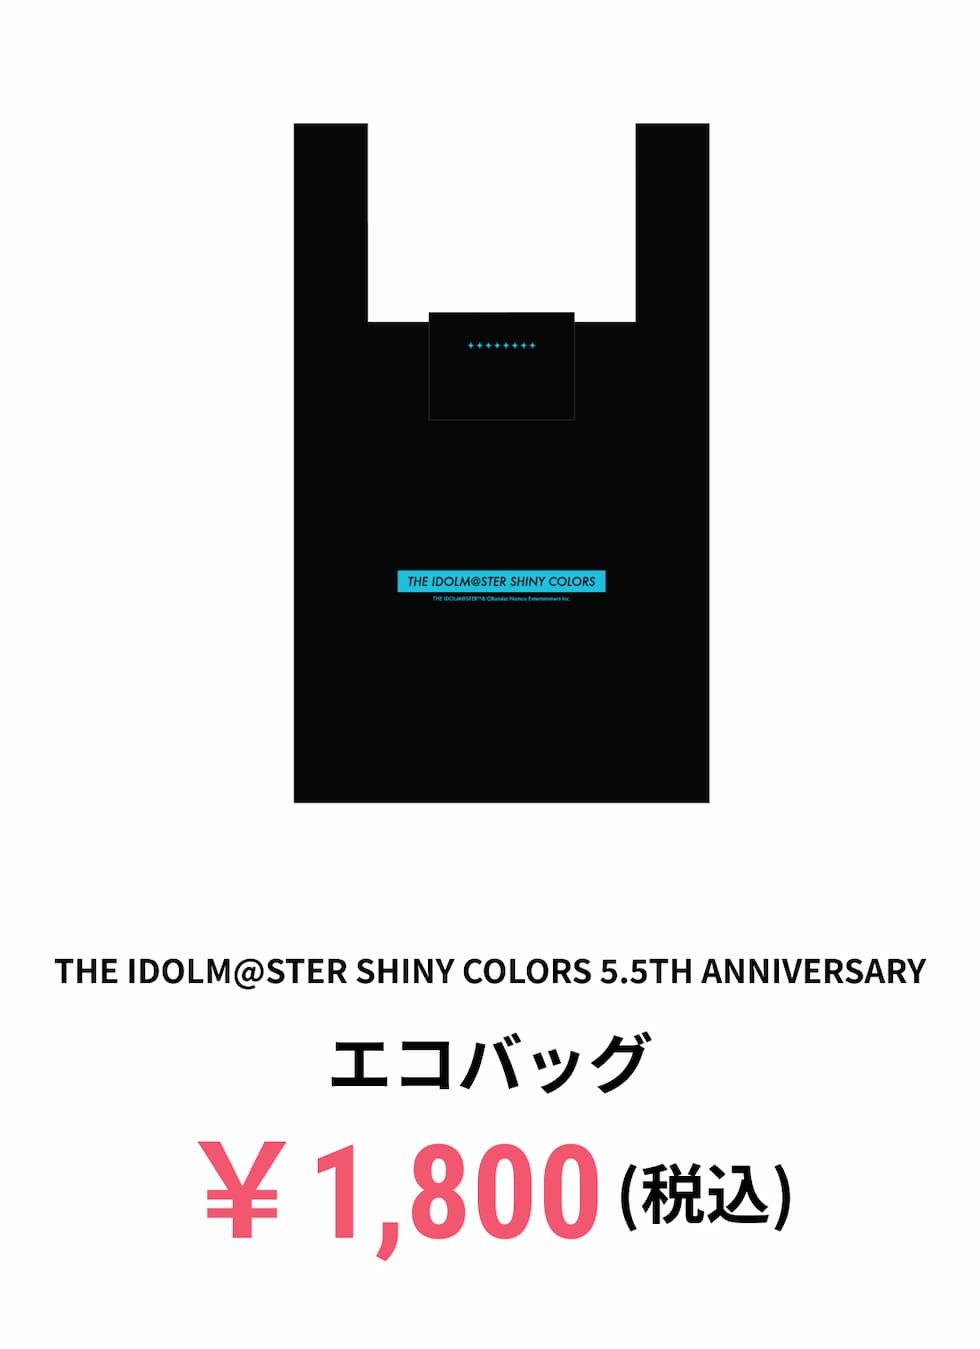 THE IDOLM@STER SHINY COLORS 5.5th Anniversary　エコバッグ